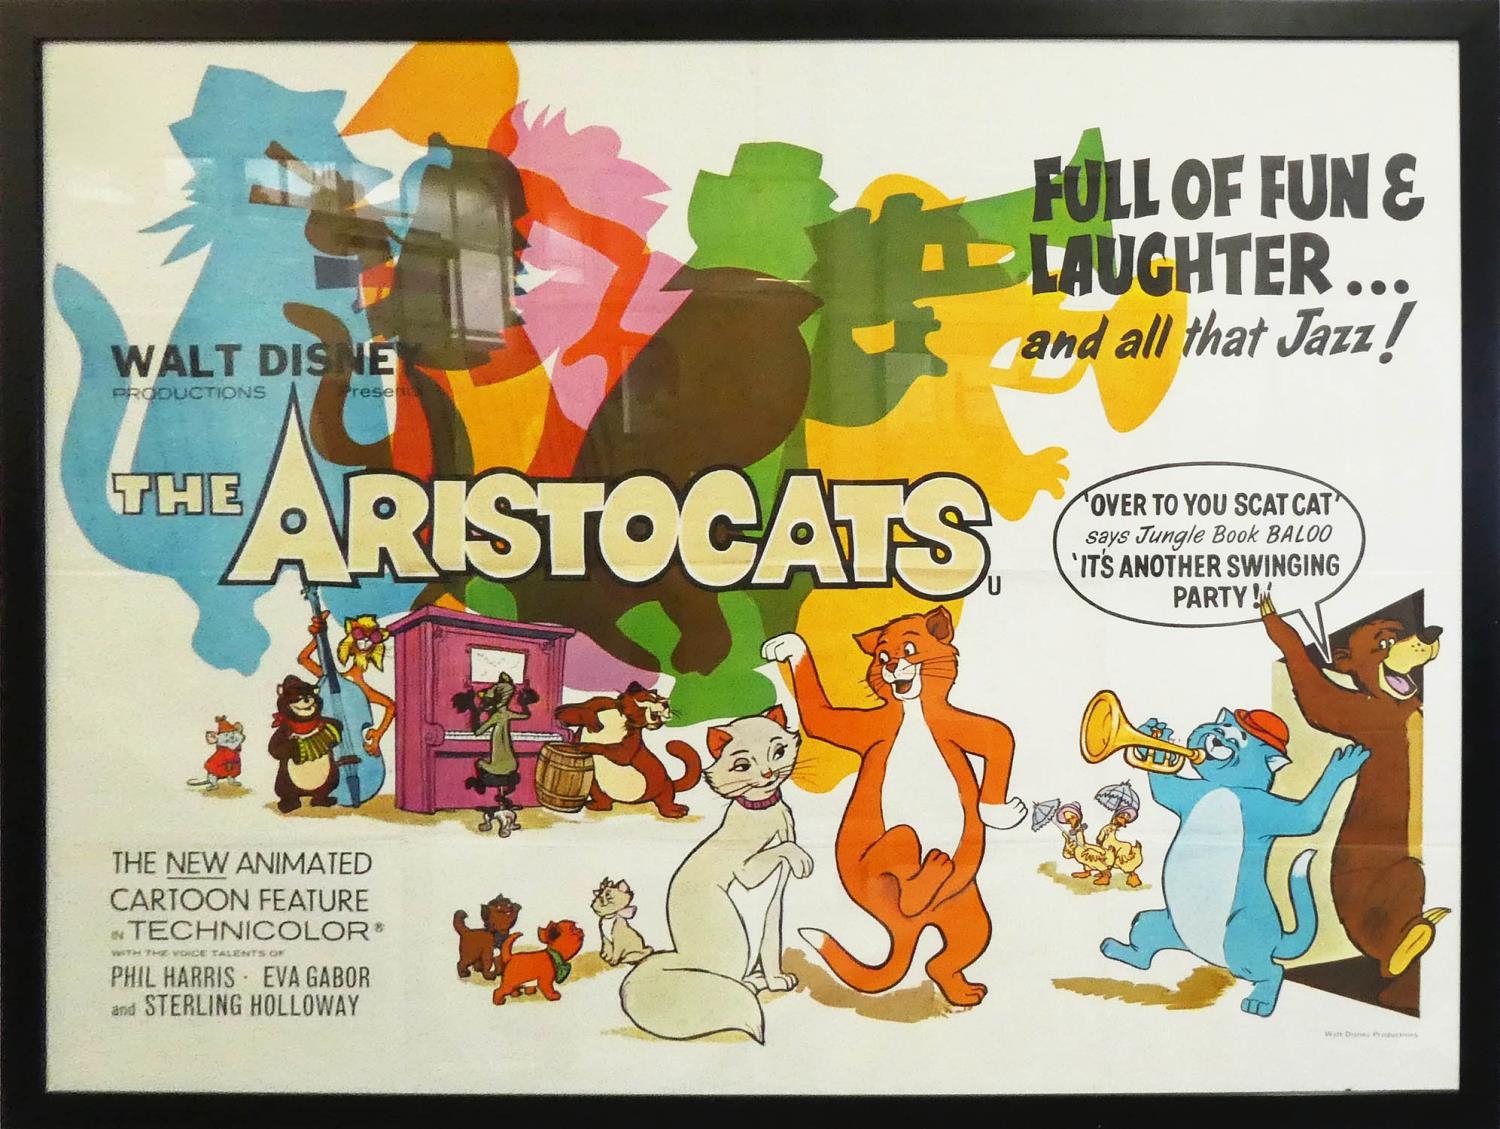 Original 1970's 'ARISTOCATS' colour movie poster, printed in England by Lonsdale & Bartholomew